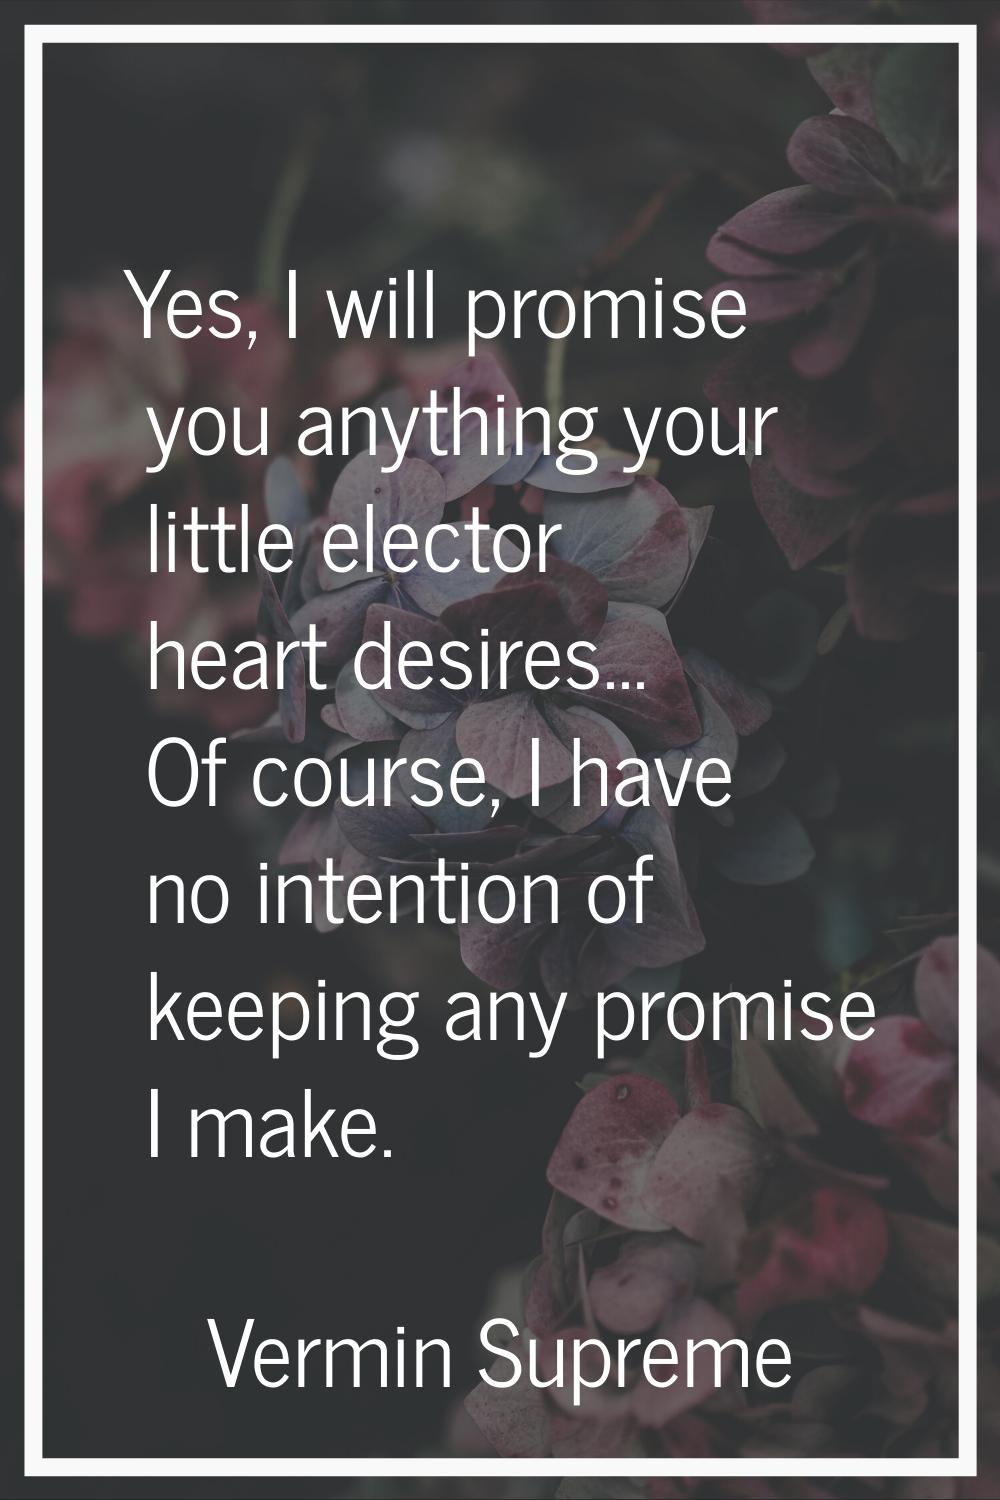 Yes, I will promise you anything your little elector heart desires... Of course, I have no intentio